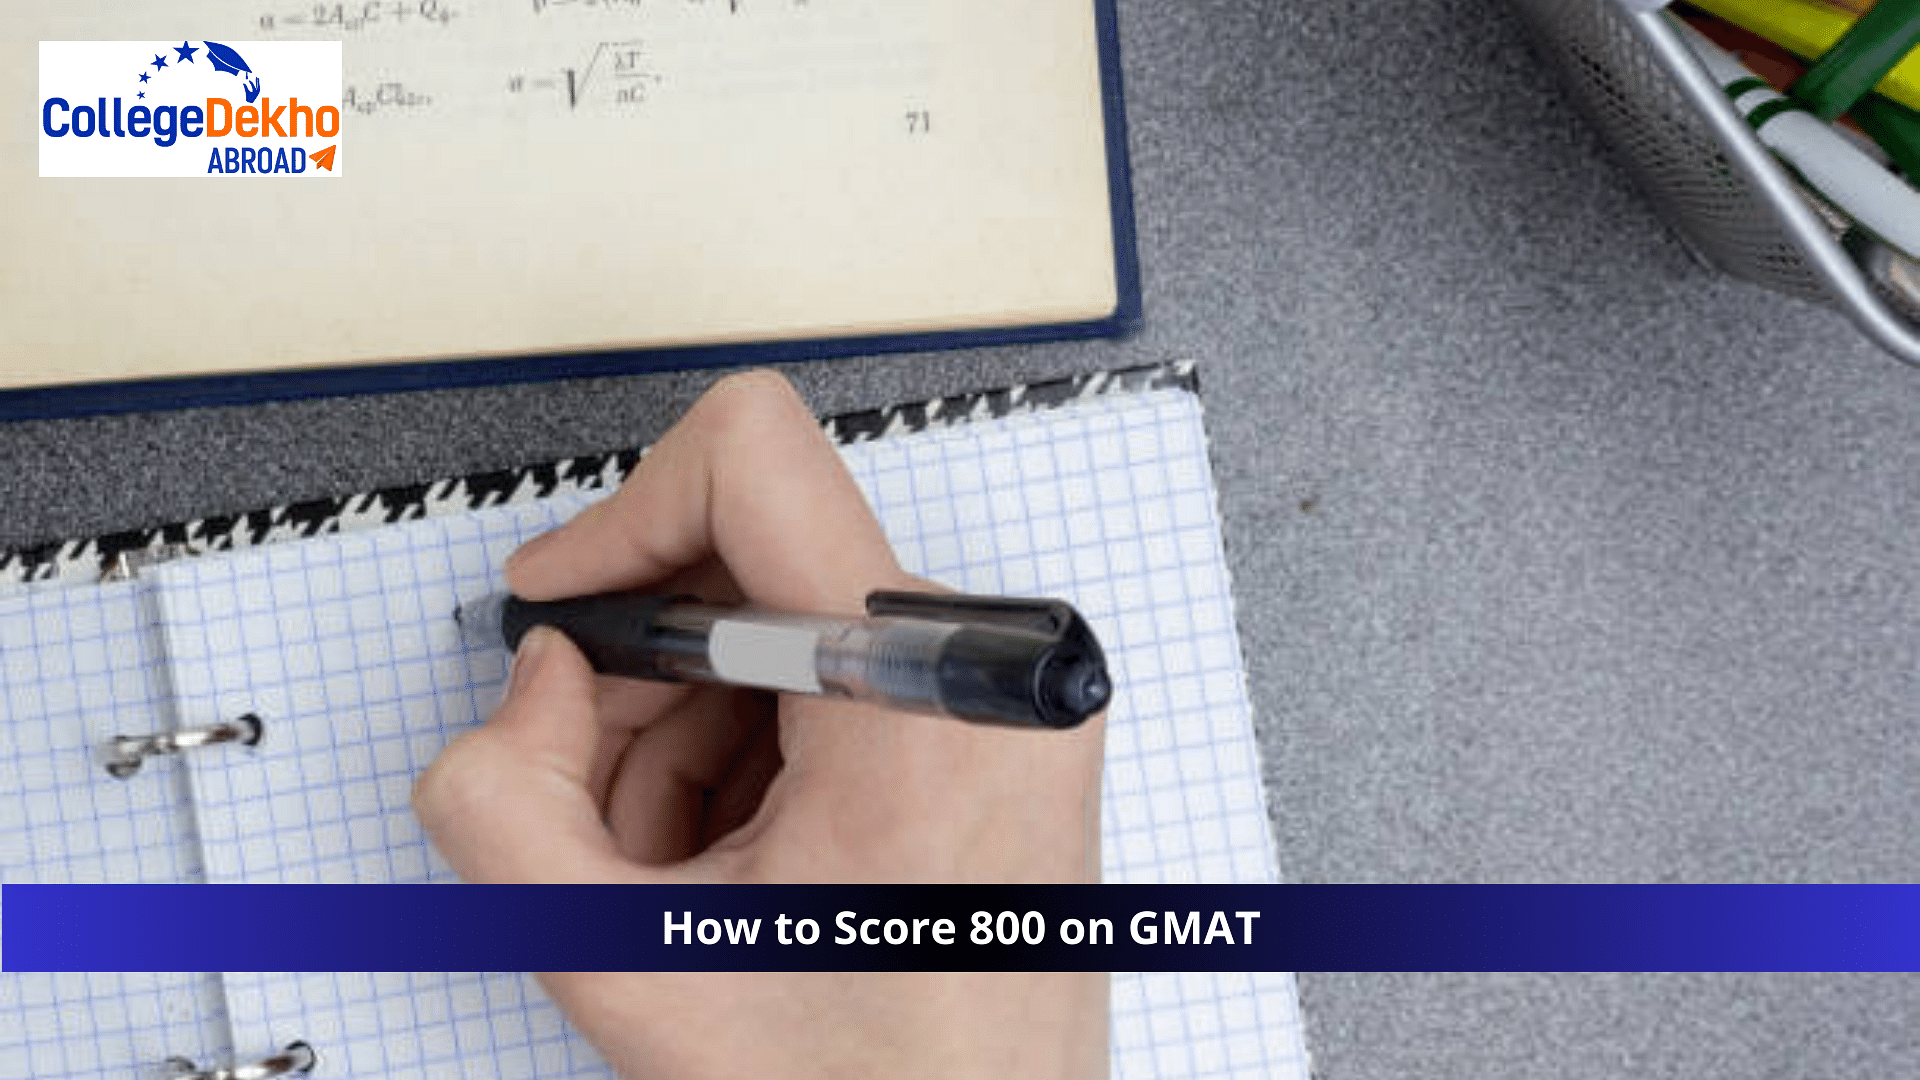 How to Score 800 on GMAT